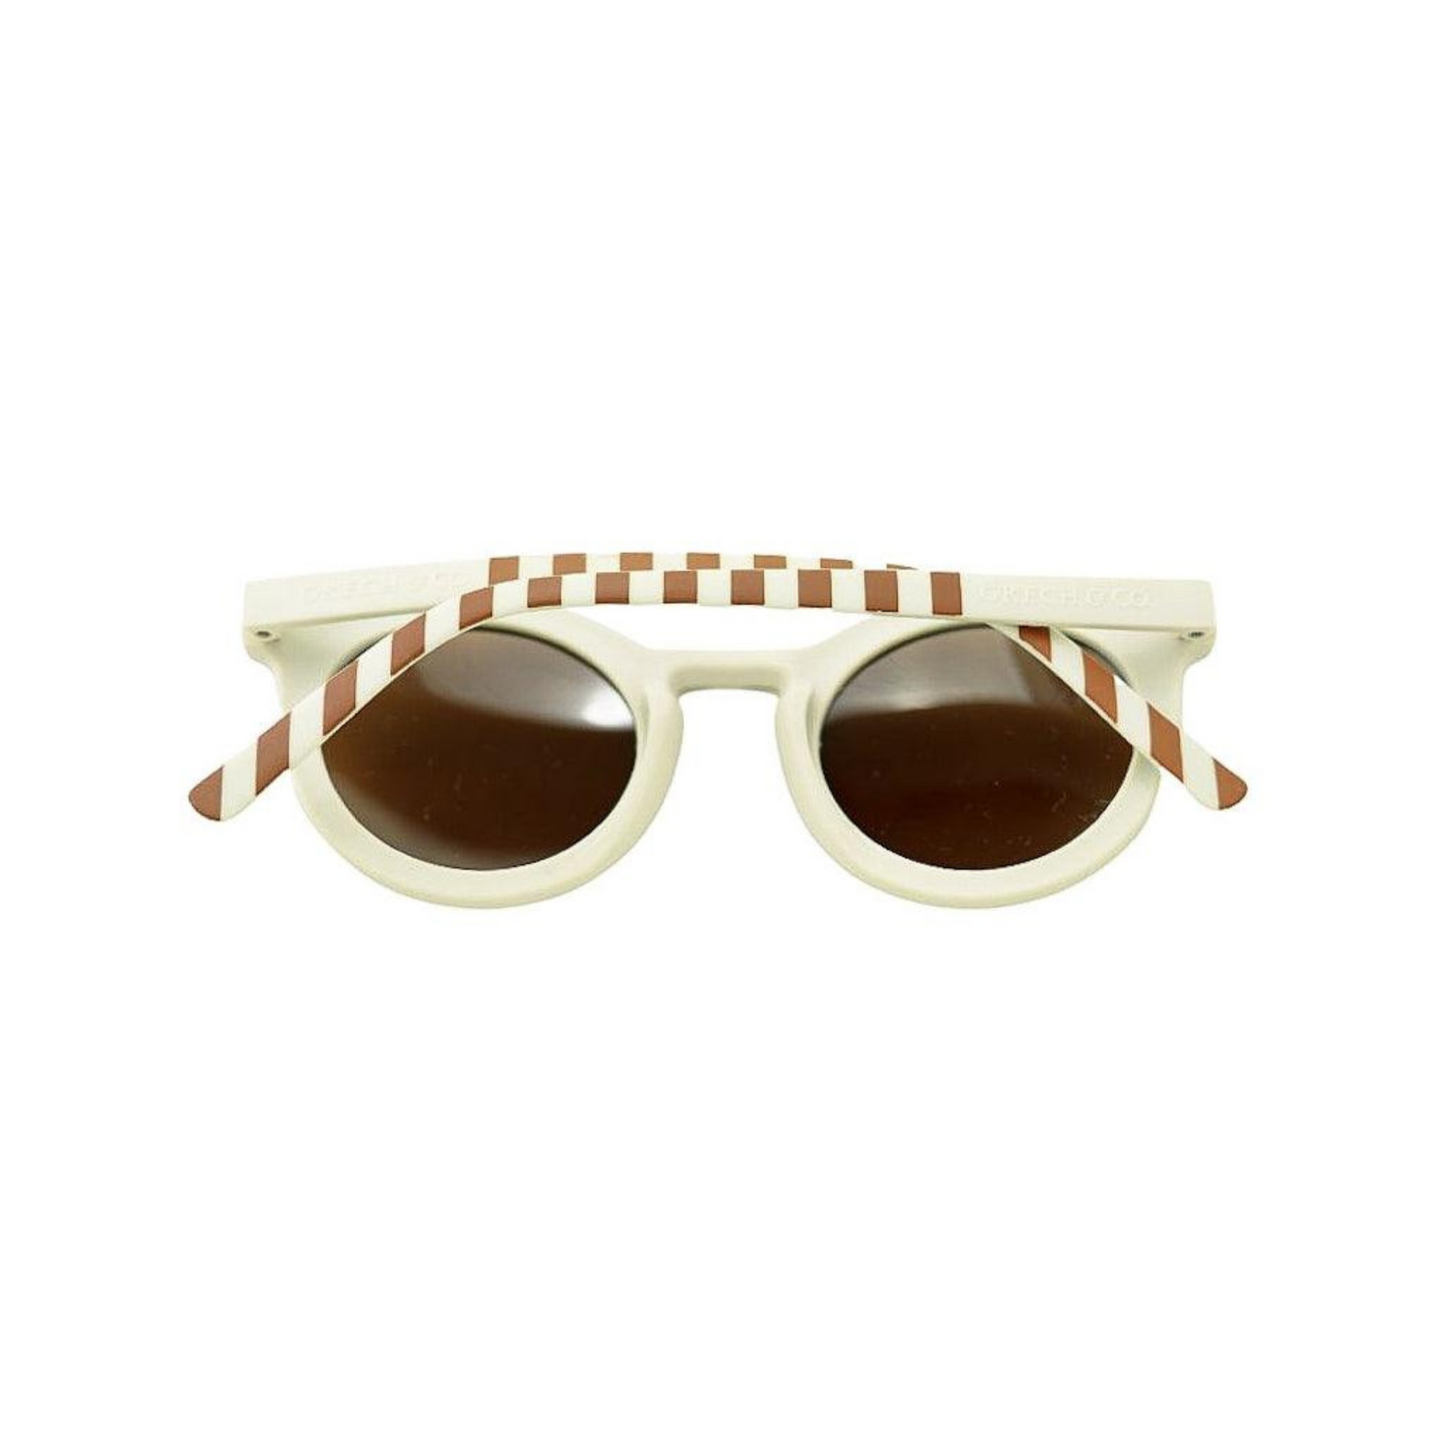 Classic Sustainable Children's Sunglasses in Atlas and Tierra Stripes